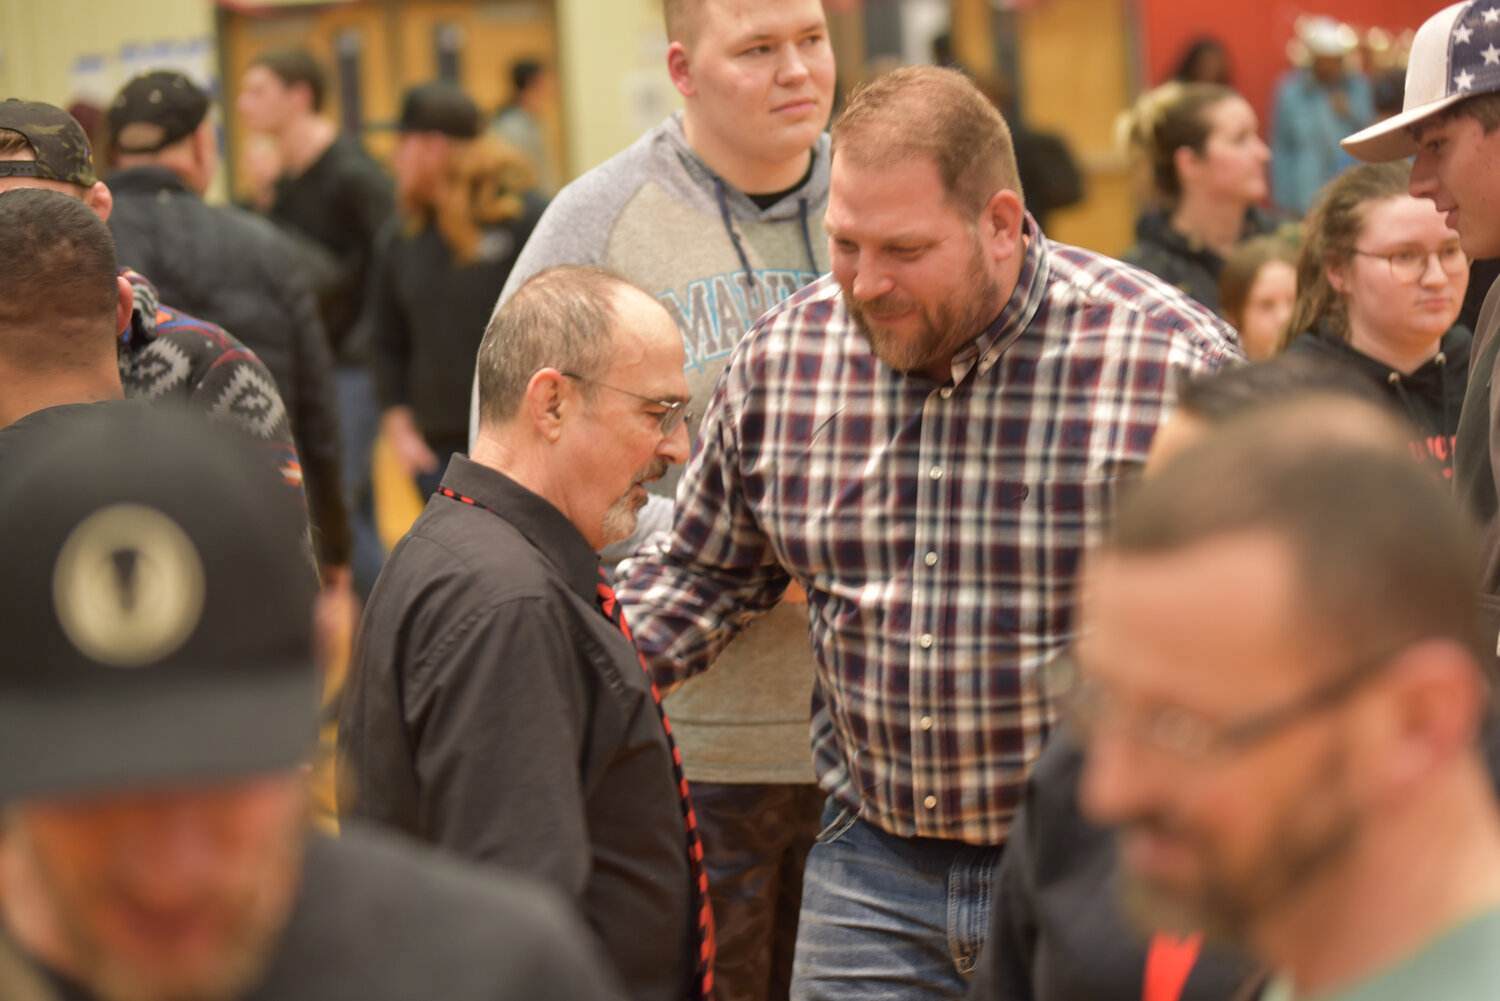 Yelm's head wrestling coach Gaylord Strand embraces a person who attended his final home dual as a Tornado after the "Bad to the Bone" dual against Bethel.